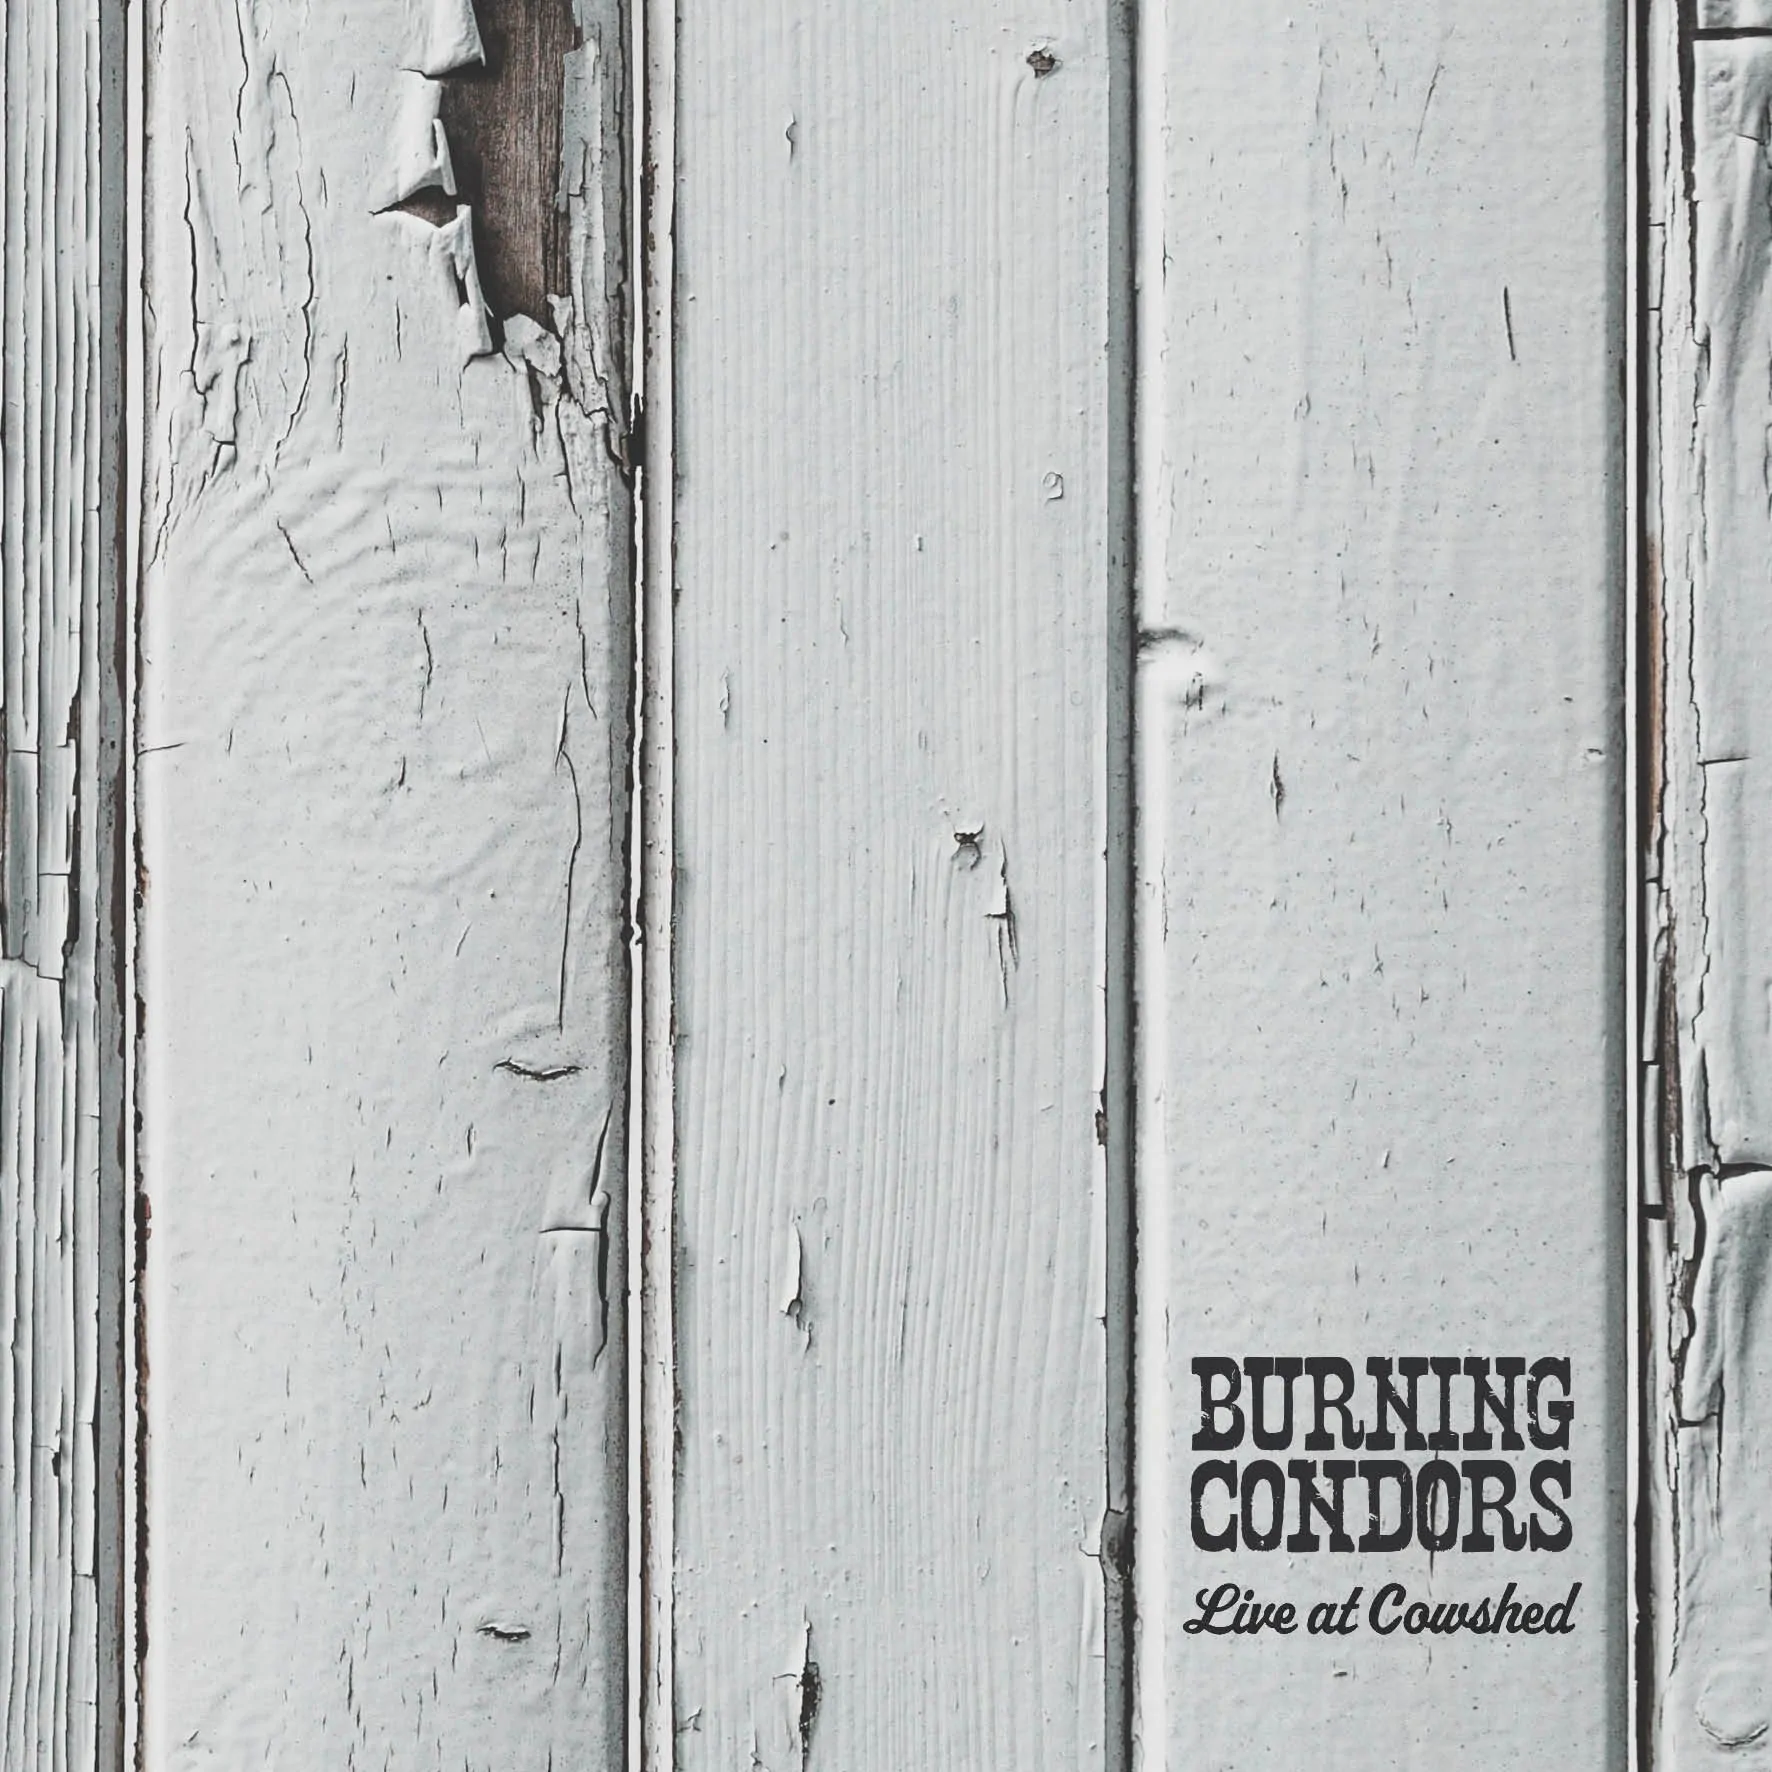 ALBUM REVIEW: Burning Condors – Live at Cowshed